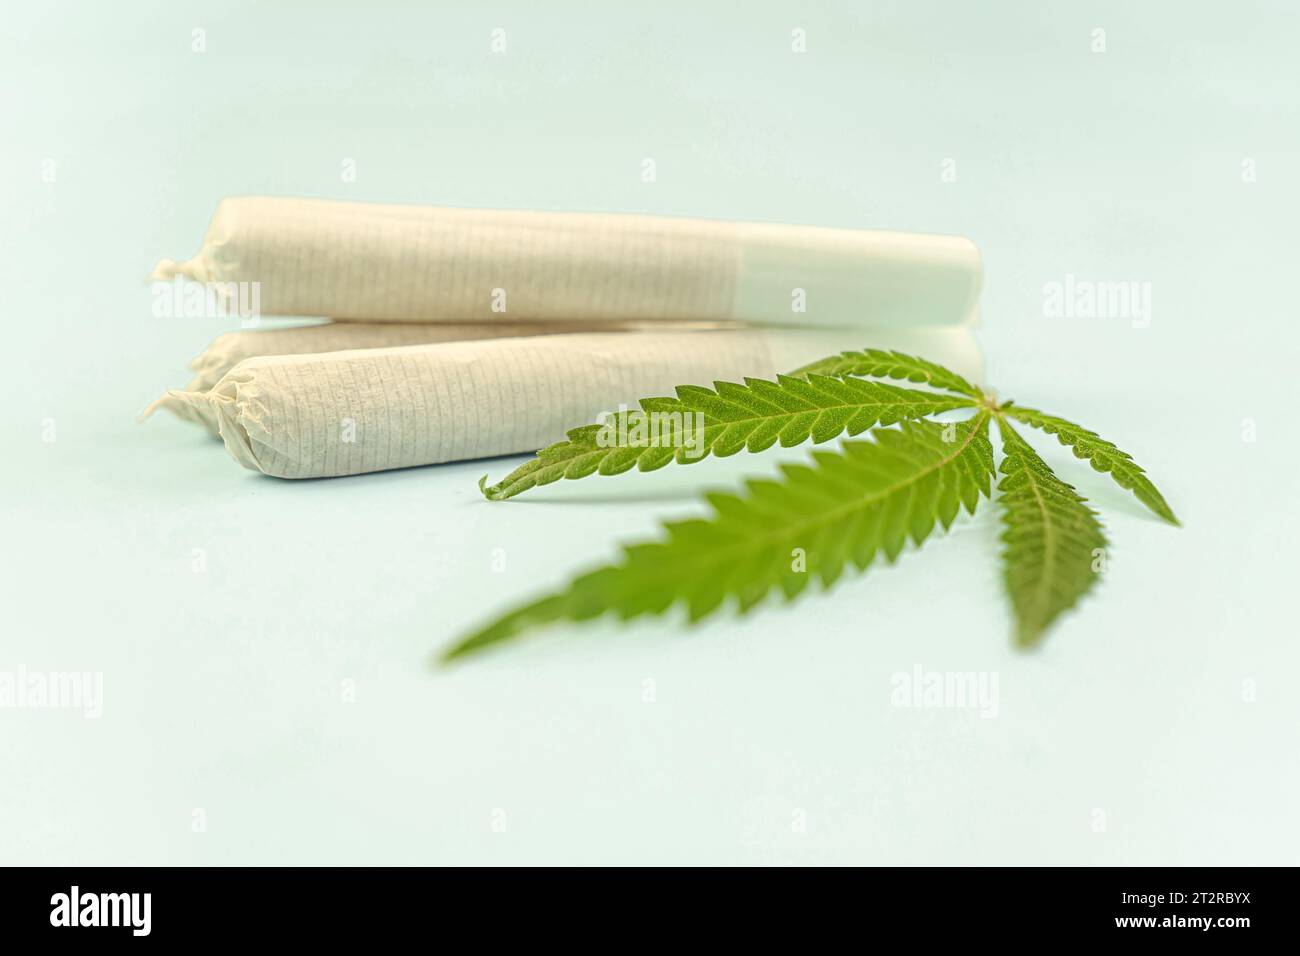 Preparing cannabis joint with tobacco and rolling paper with marijuana bud on blue background. The insinuation of marijuana abuse. cannabis legalizati Stock Photo